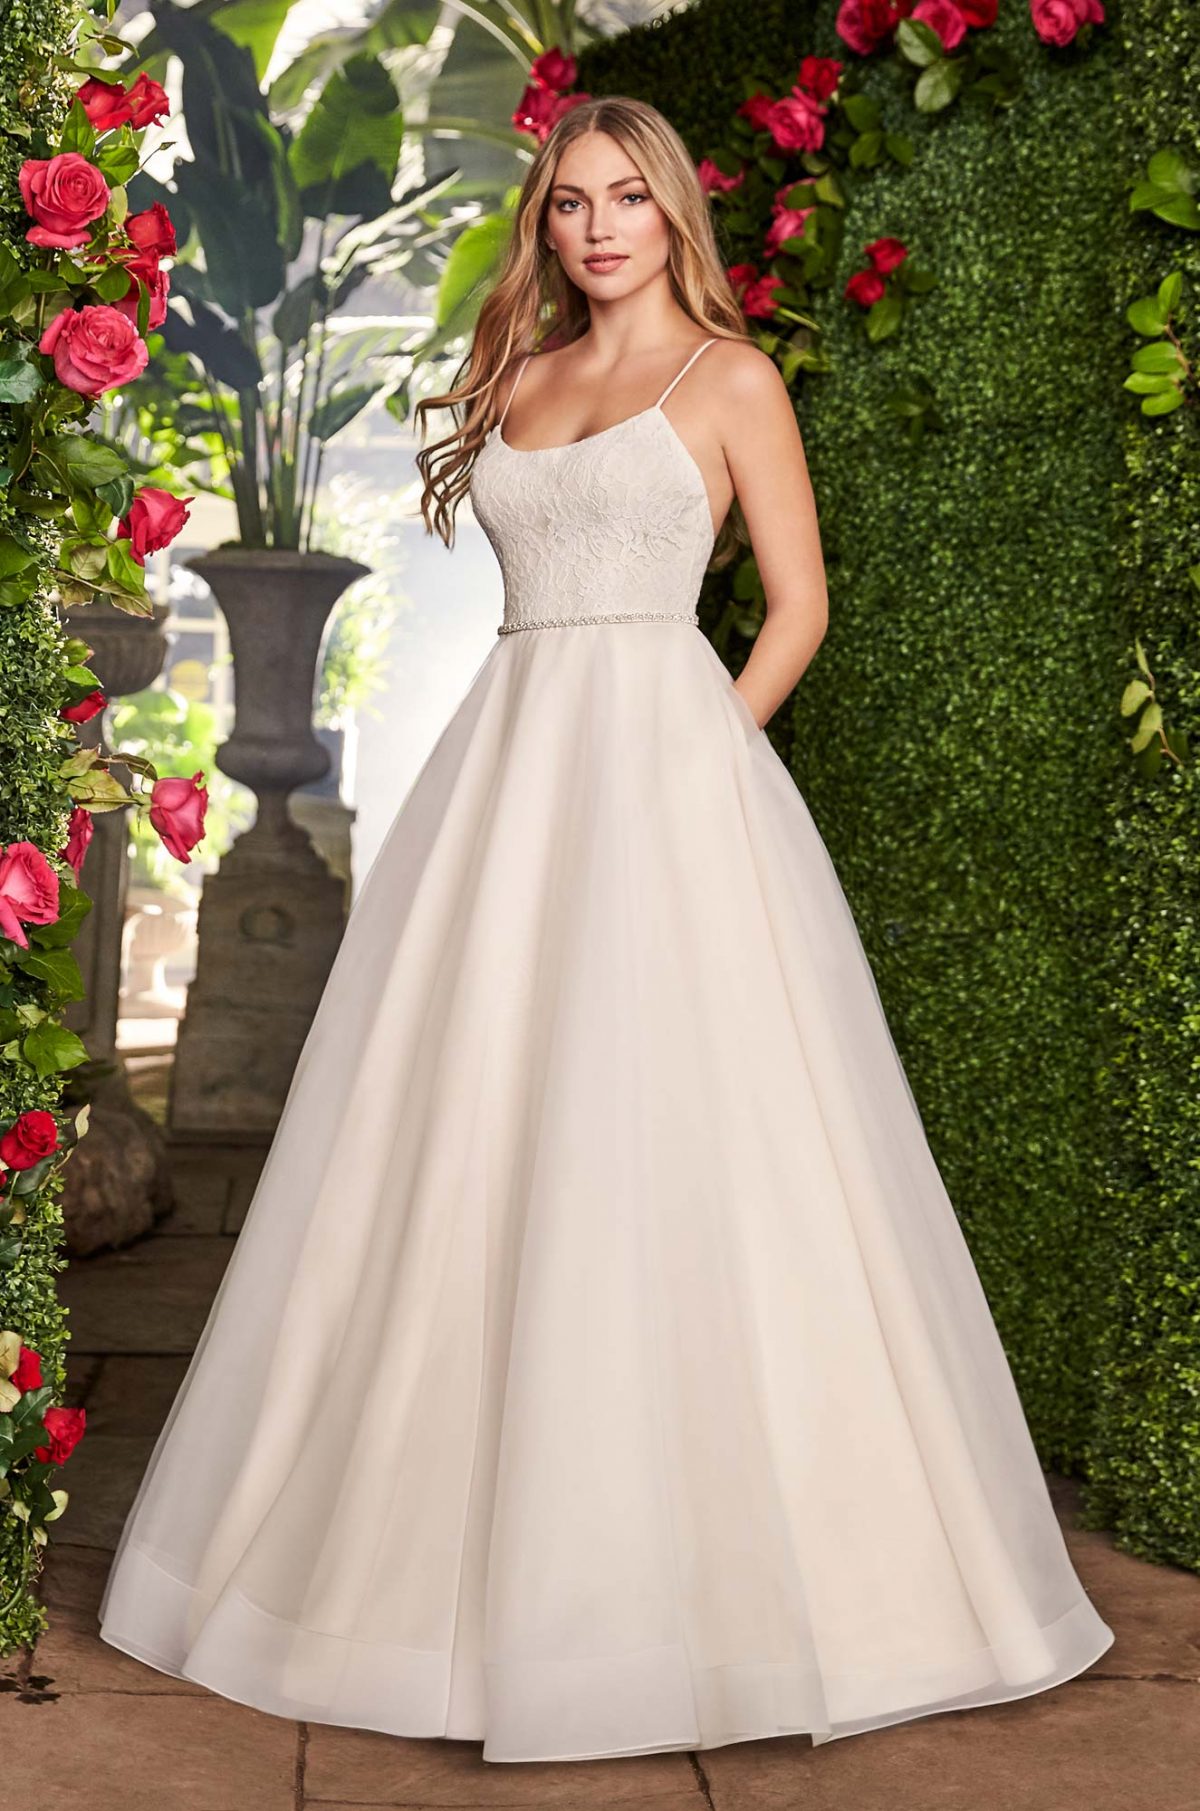 7 Unique Style Tips to add to Your Classic Wedding Dress - Amanda ...